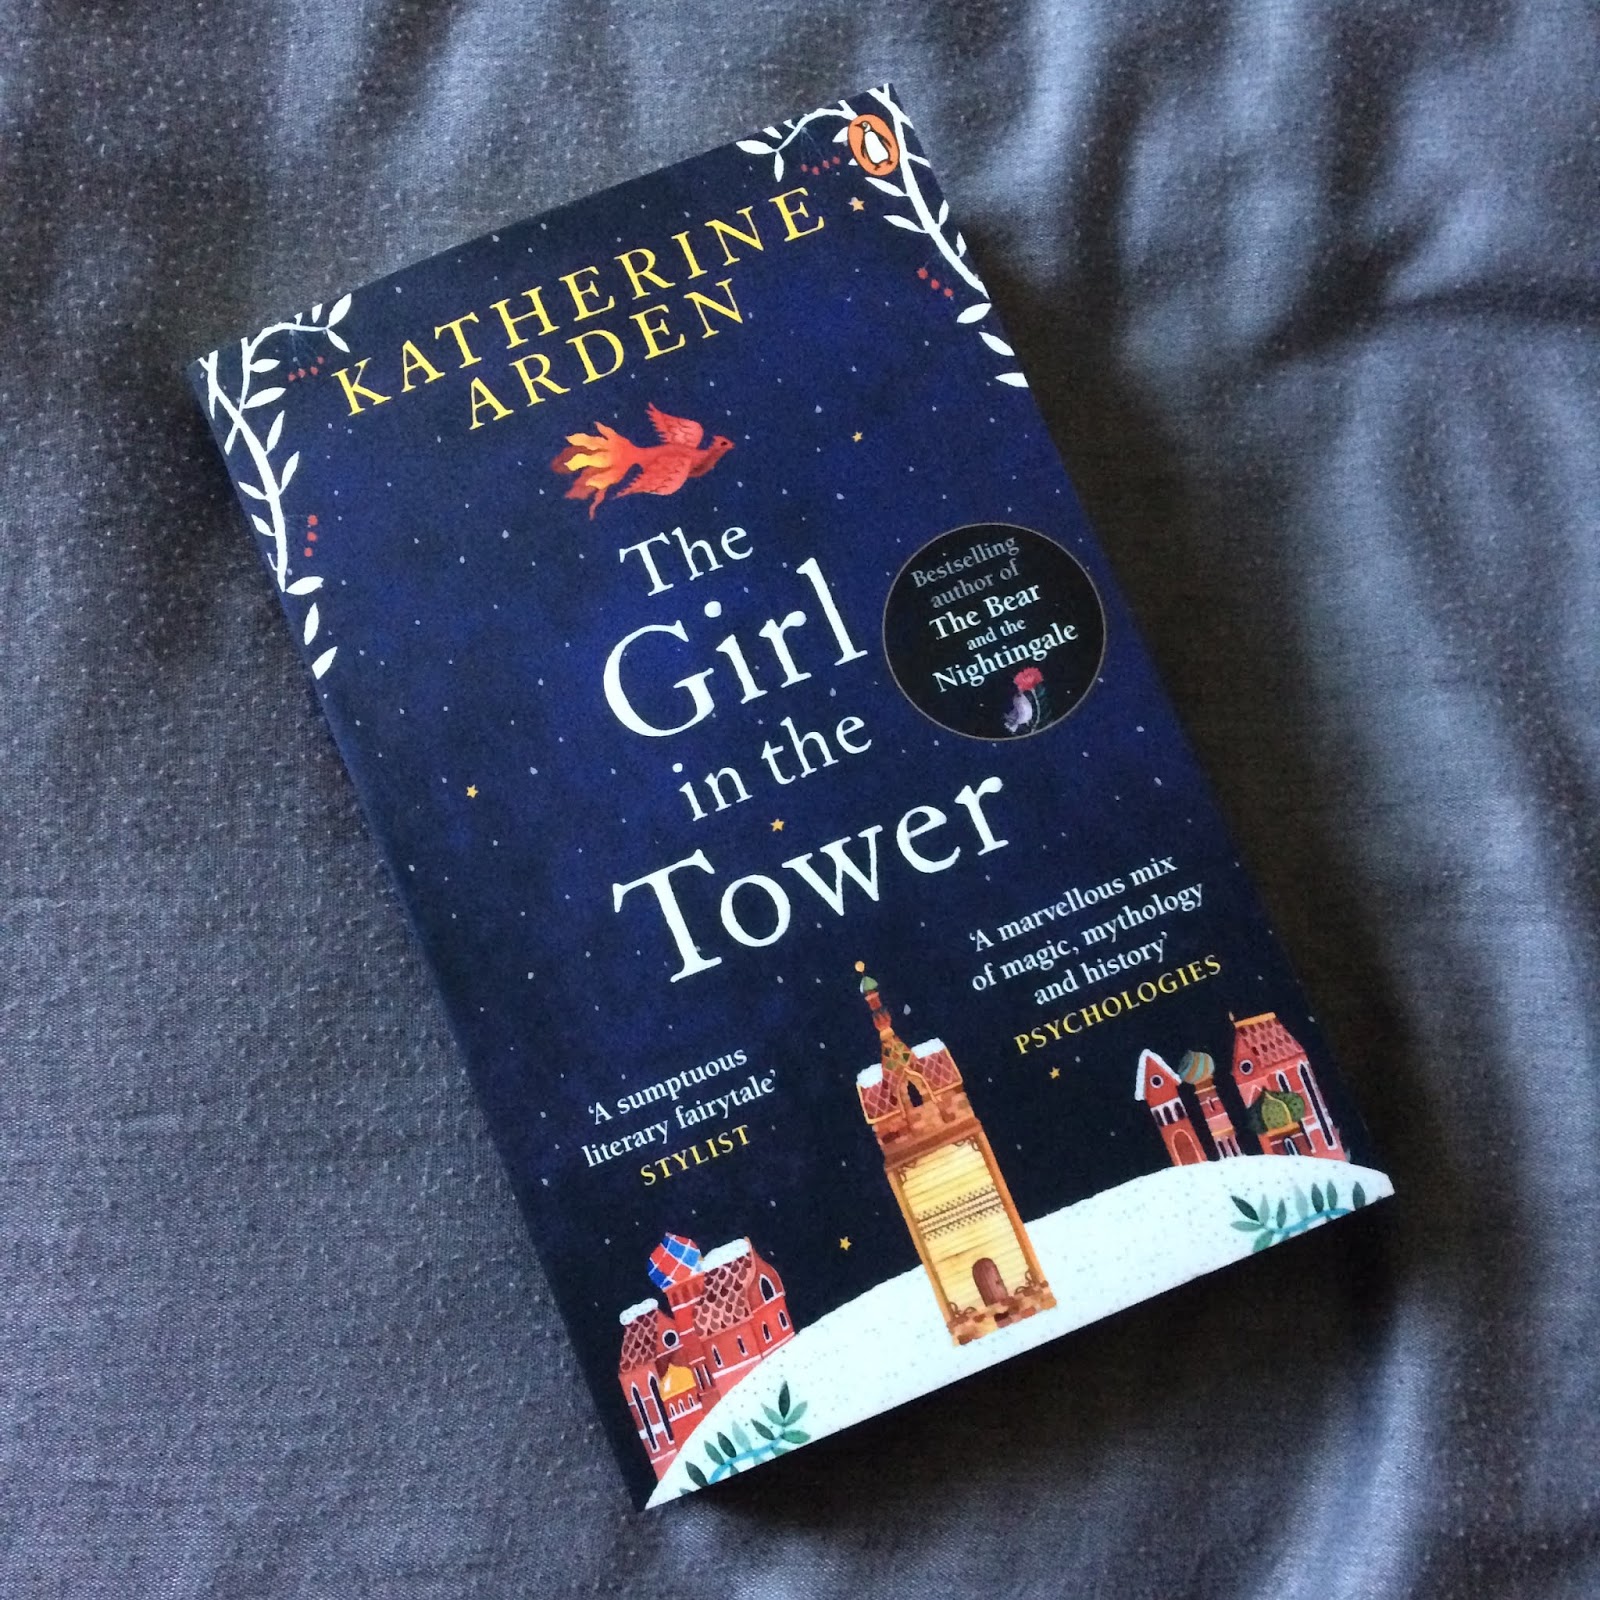 The Girl in the Tower by Katherine Arden